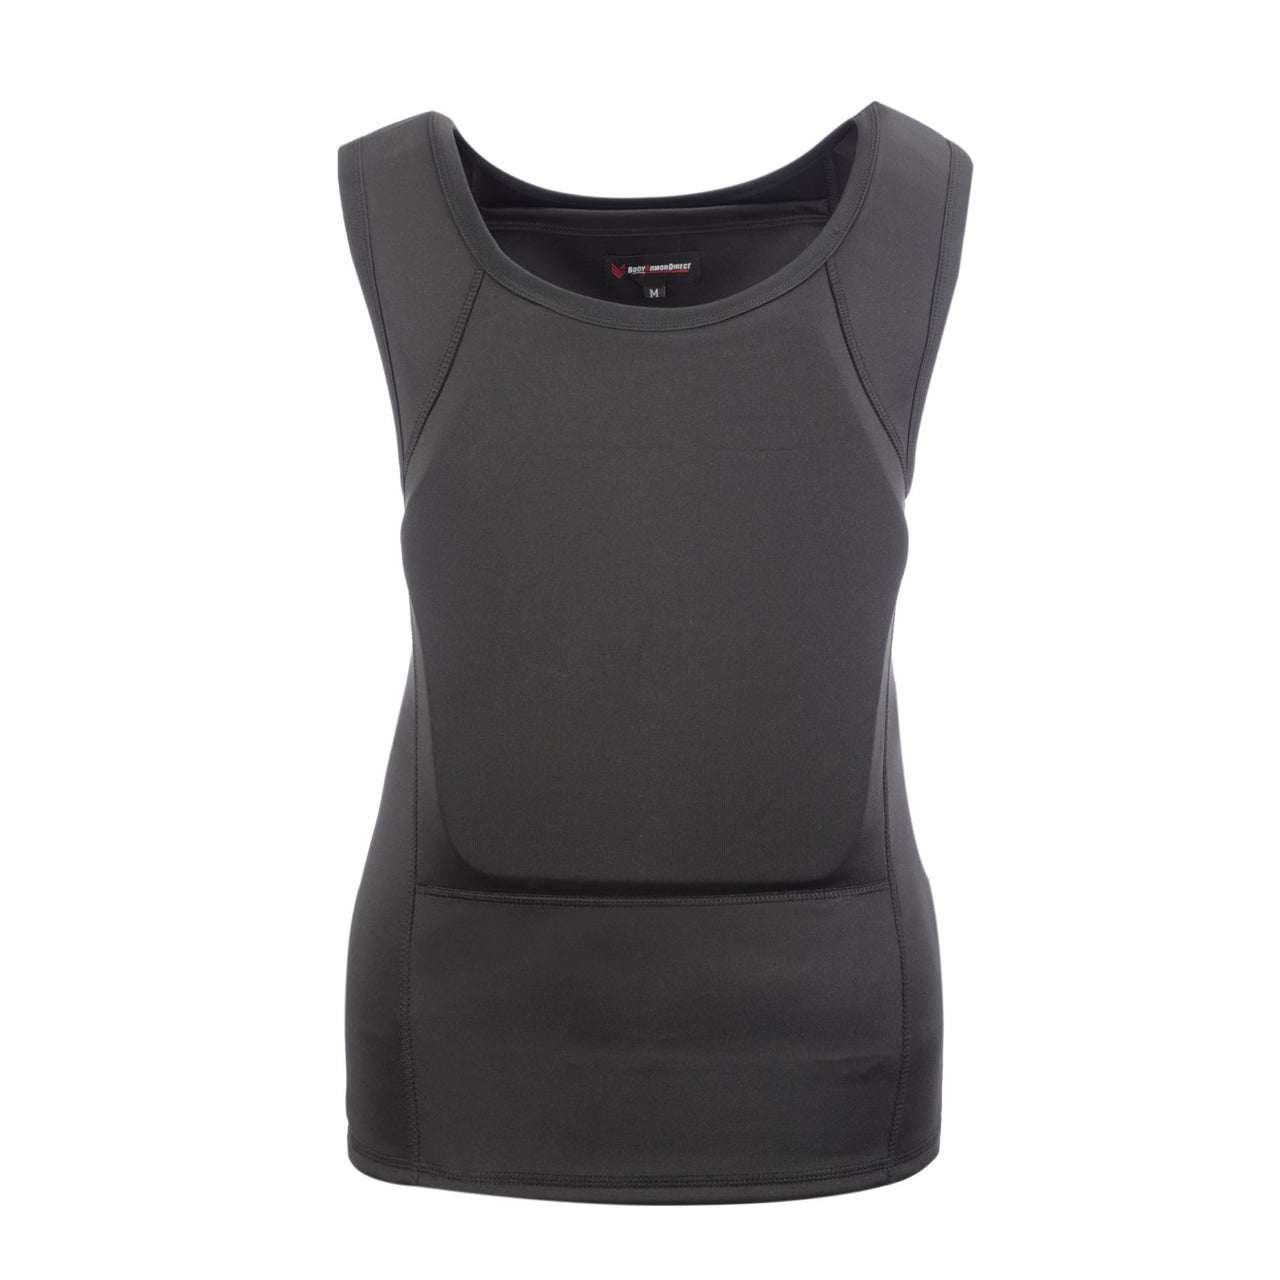 A women's black vest with an open back, the Body Armor Direct Concealable Express T-Shirt Carrier from the brand Body Armor Direct.